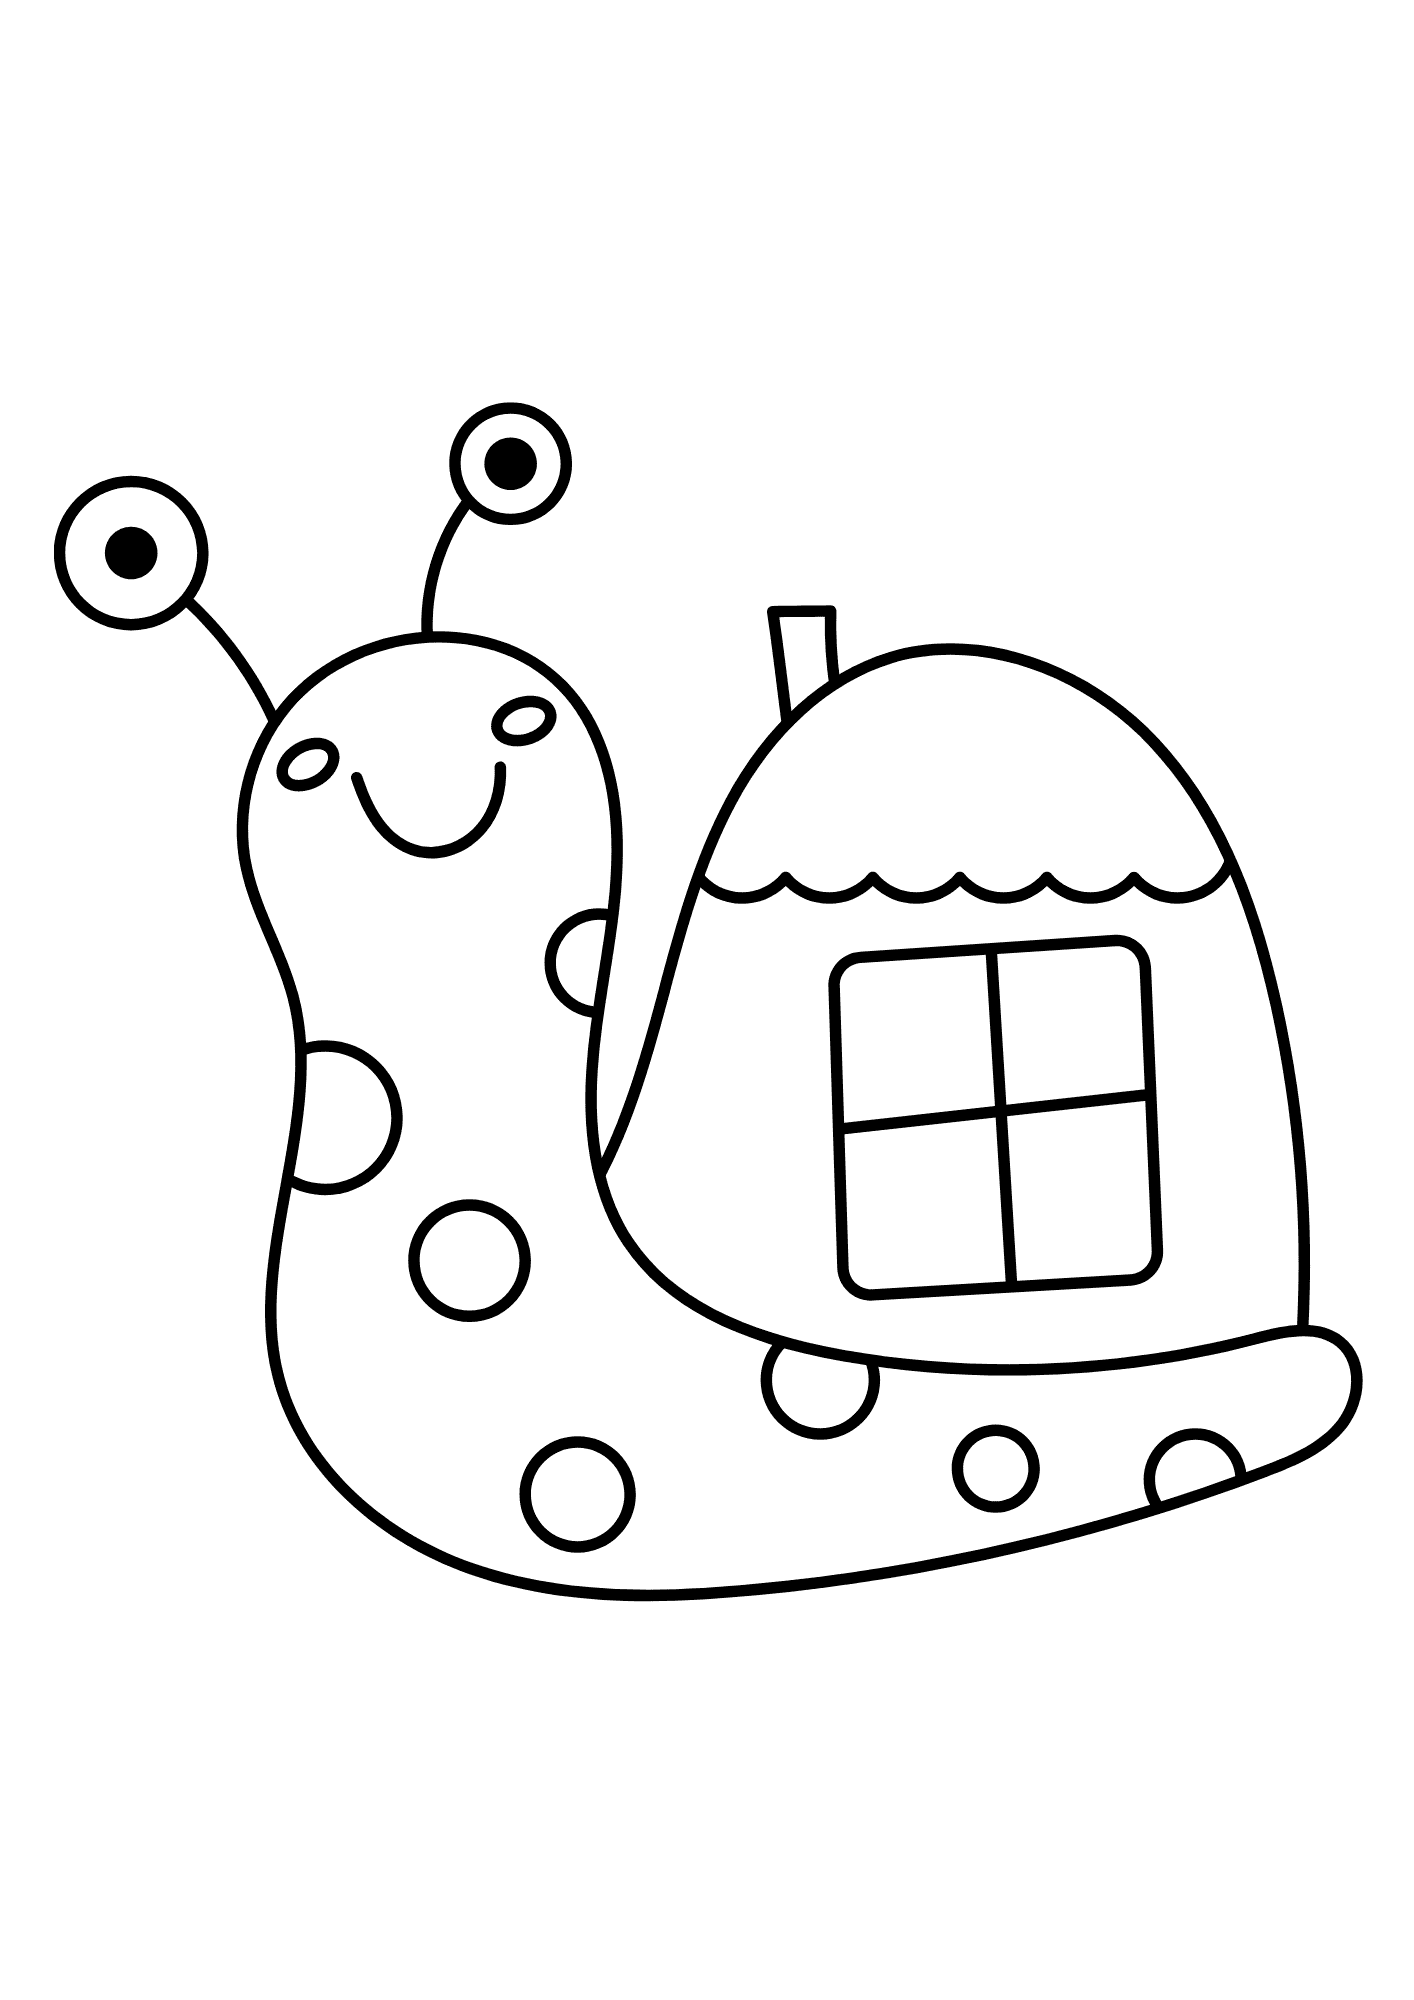 Snail Picture For Children Coloring Pages